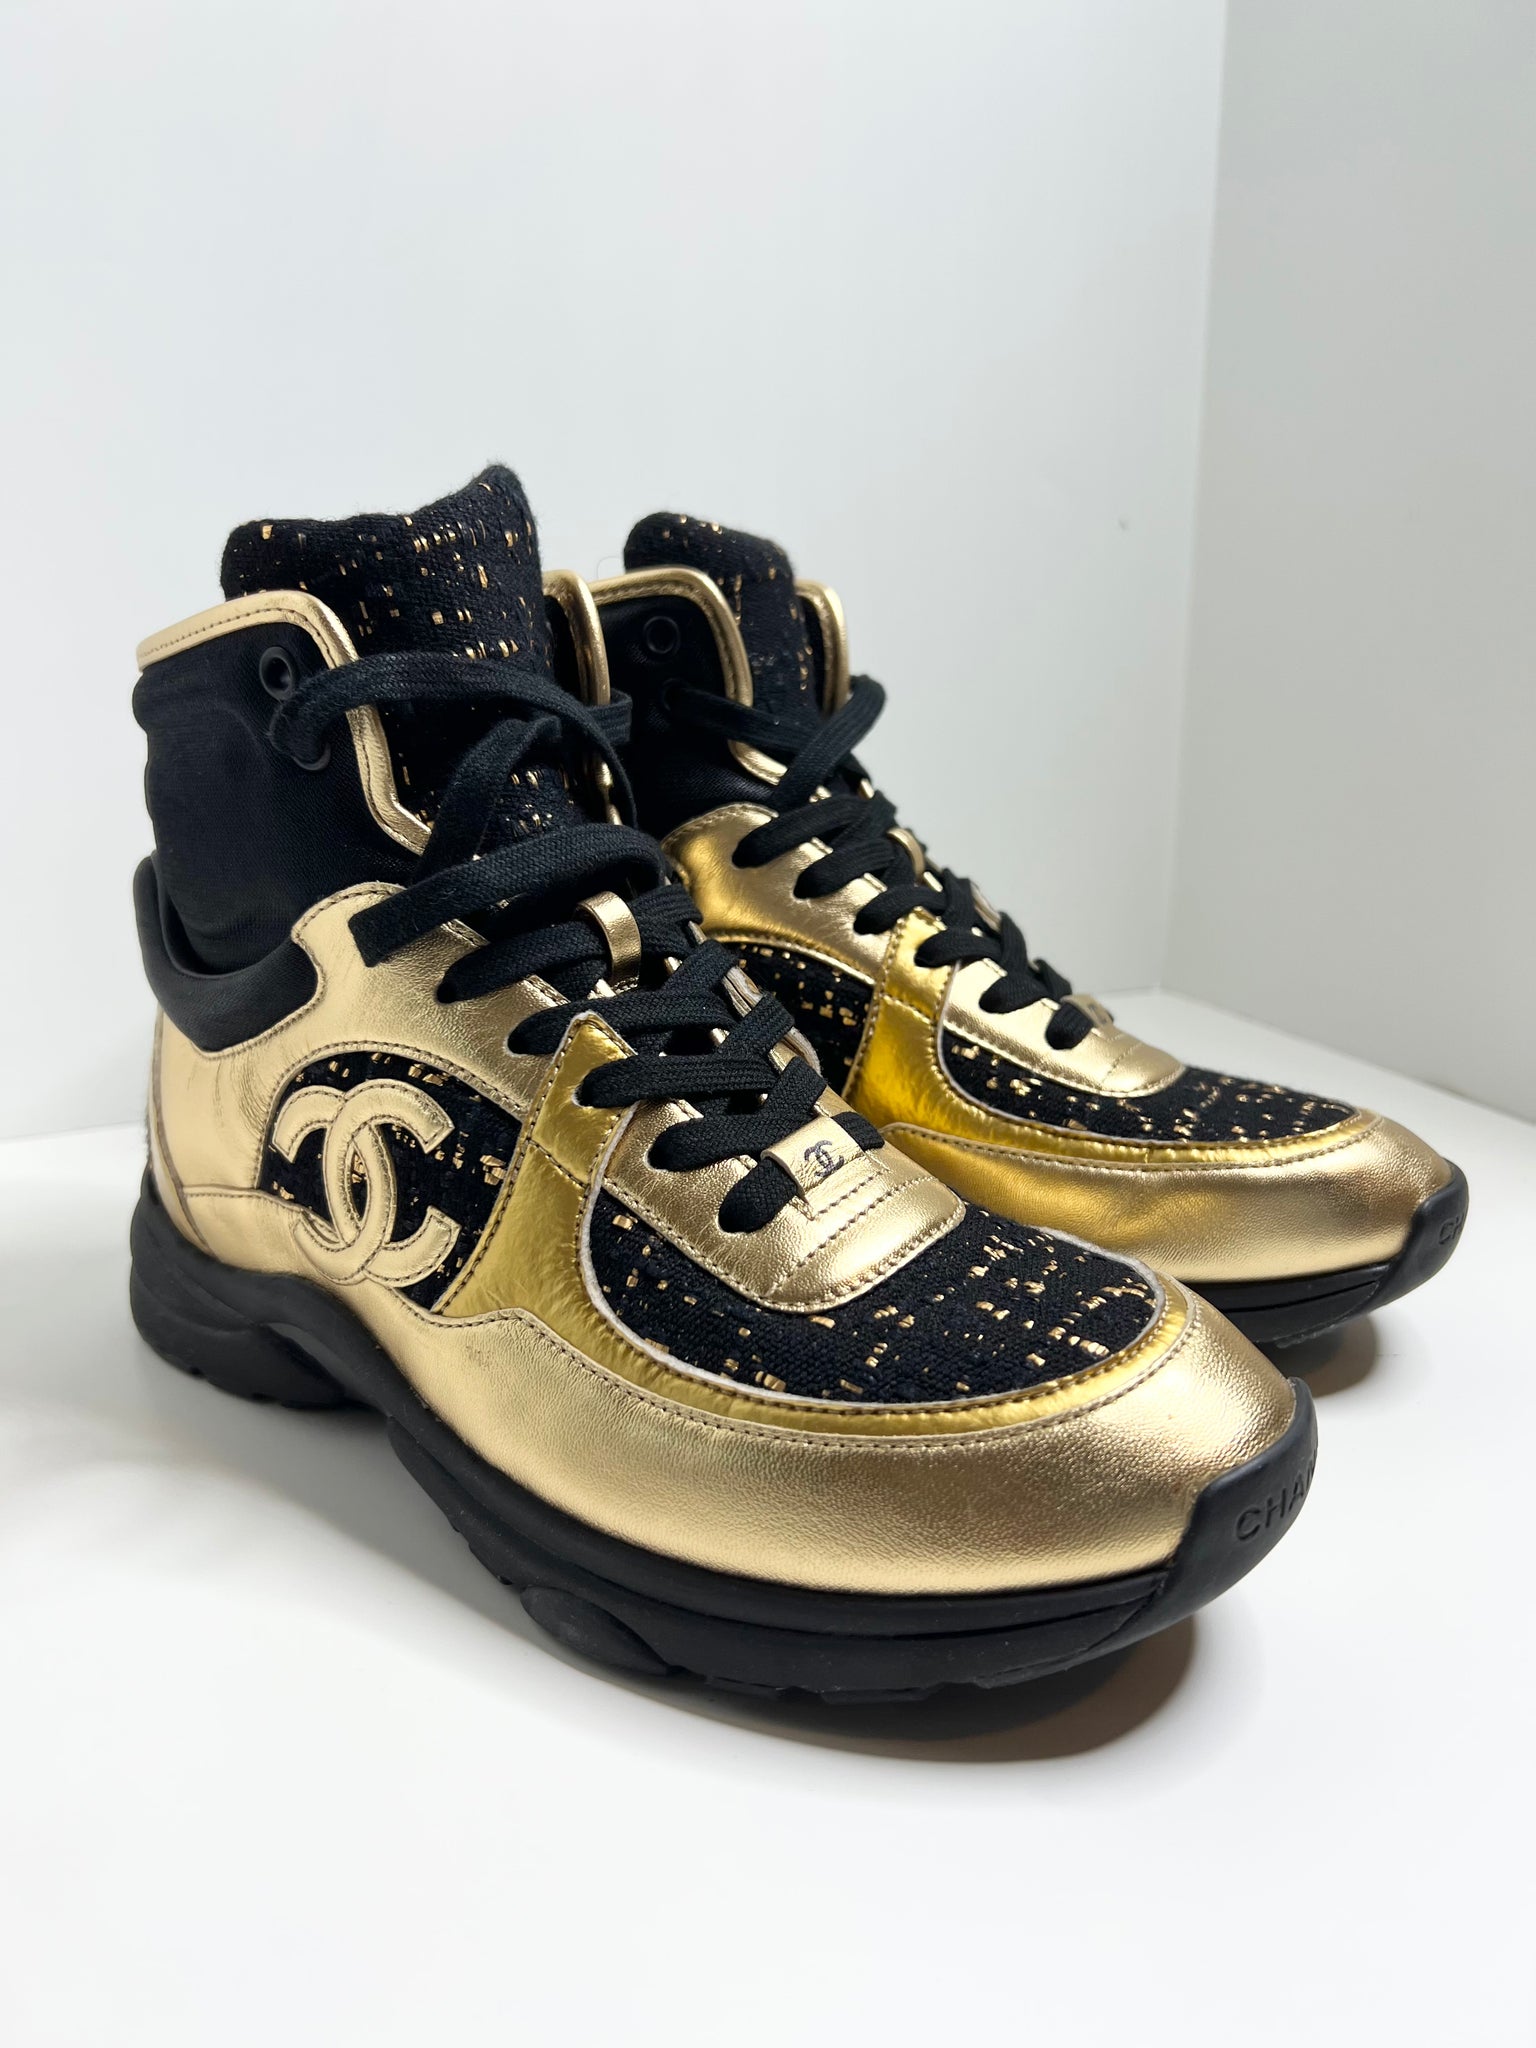 Chanel Black High Top Black & Gold Sneakers, Size 38.5 – MoMosCloset